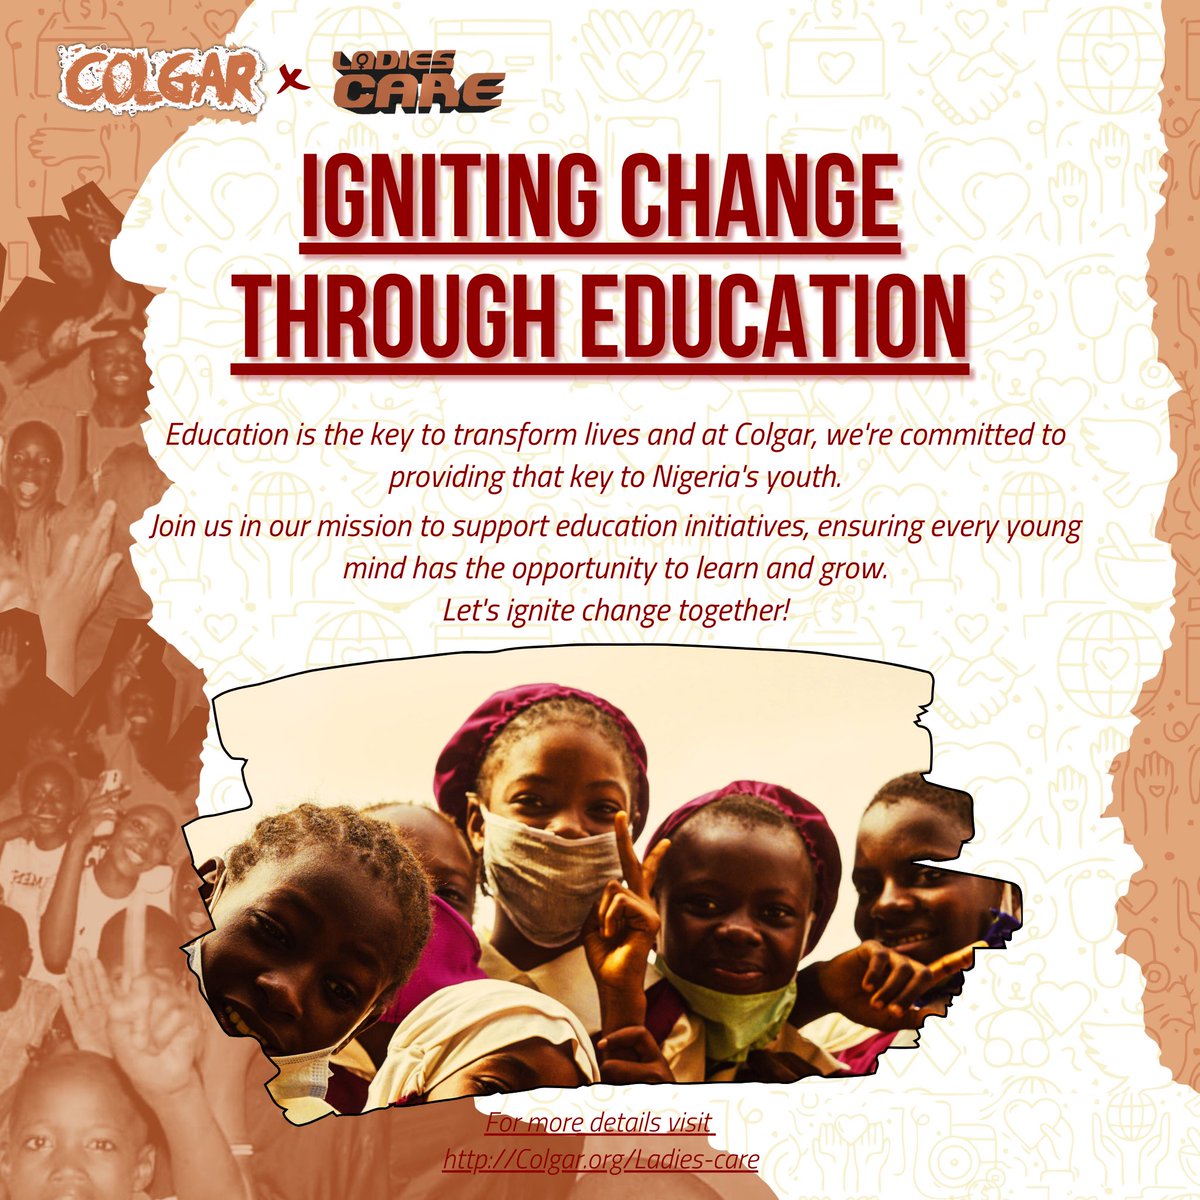 Unlocking potential through education! 🌟 Join us at Colgar as we ignite change and empower Nigeria’s youth with the tools for a brighter tomorrow. Let’s make education accessible to all and create a world where every young mind can thrive.  #IgniteChange #Colgar